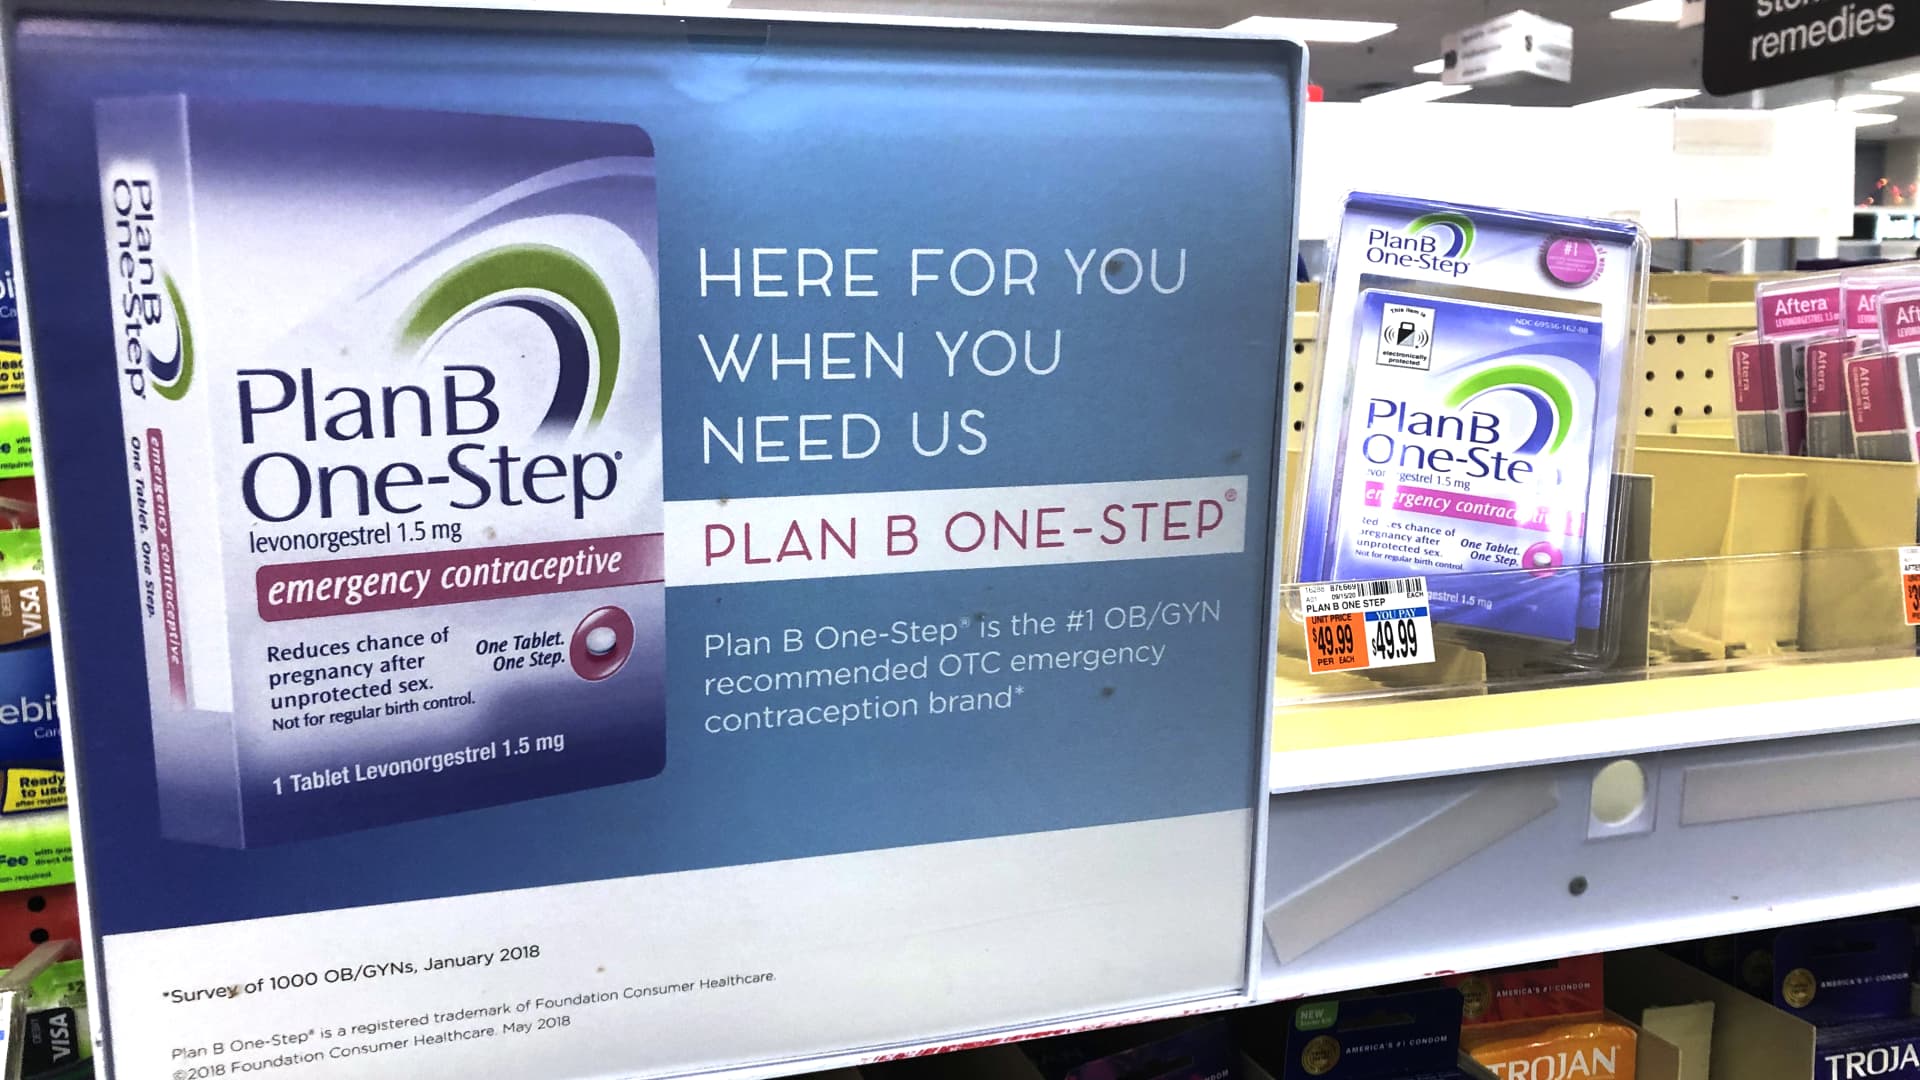 CVS removes purchase limit on Plan B pills, says sales have ‘returned to normal’